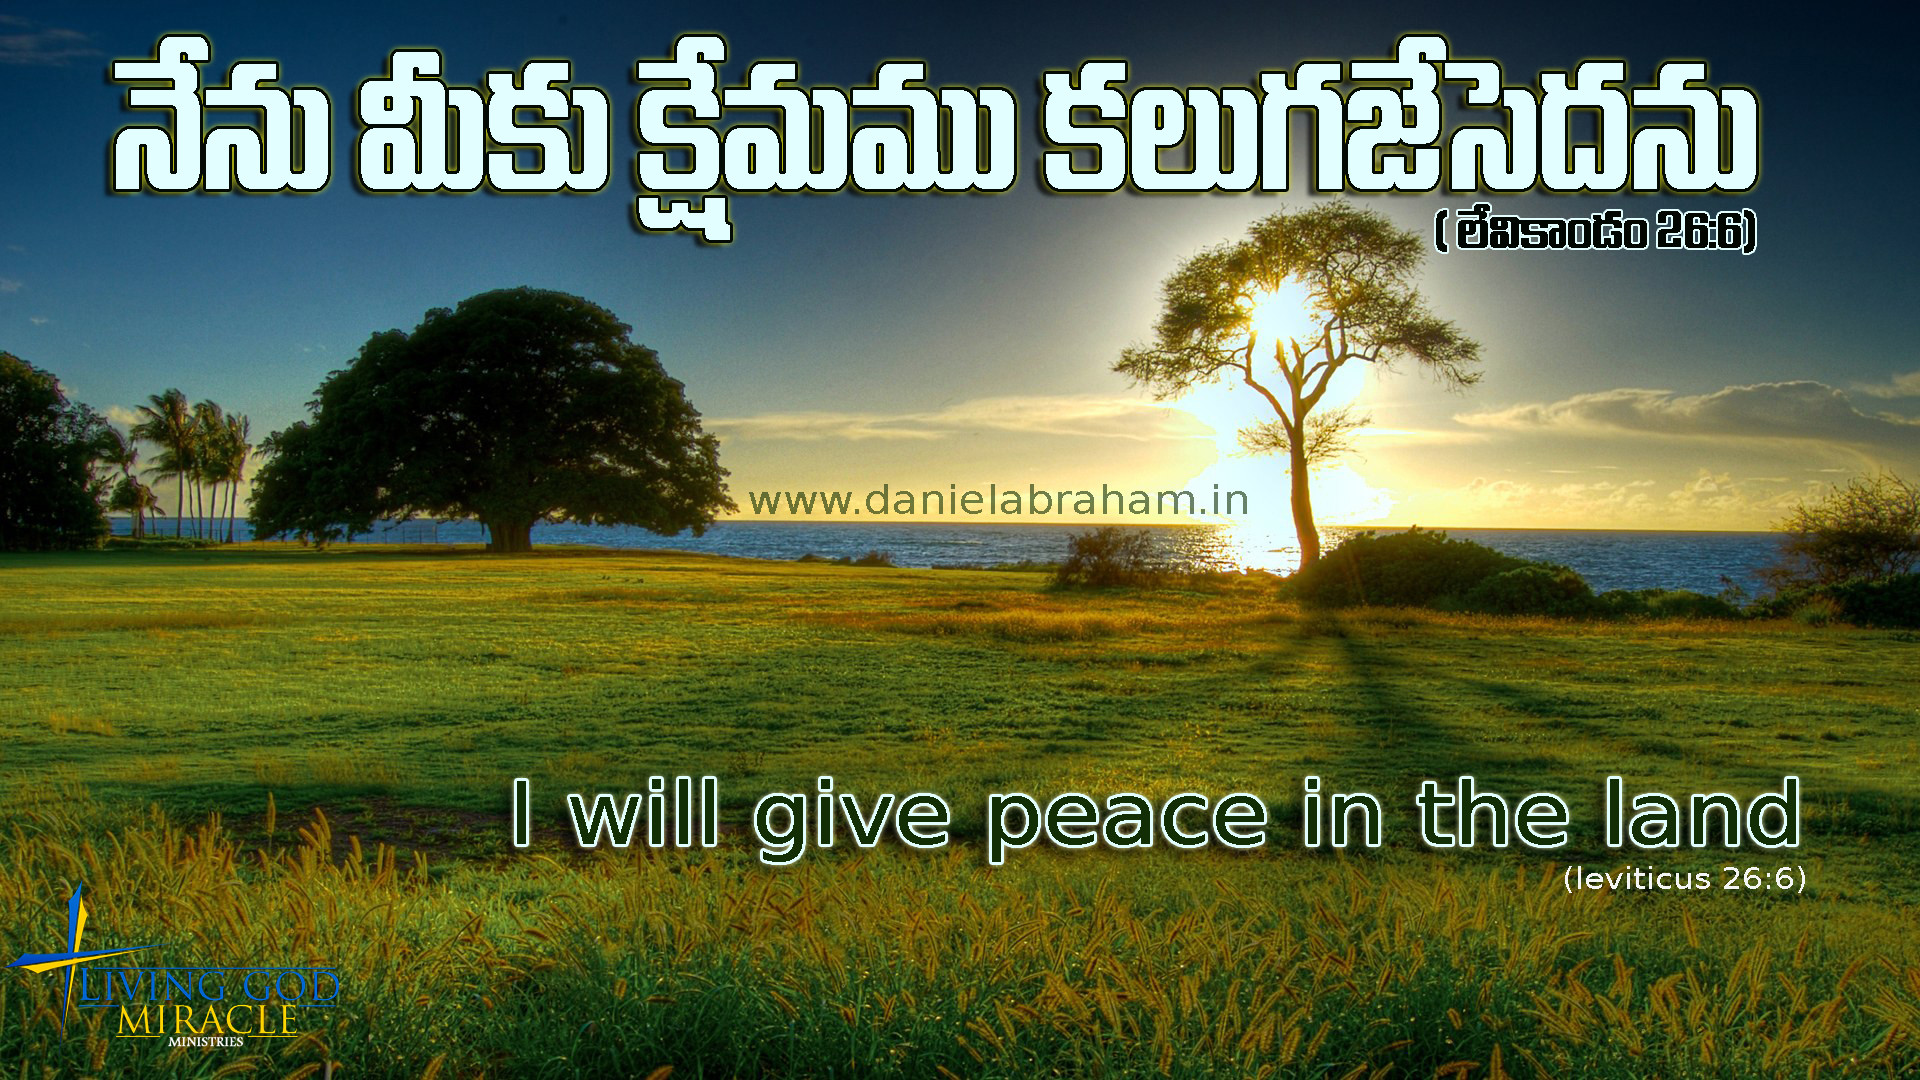 Christian Wallpapers With Bible Verses For Mobile In - Bible Promises In  Telugu - 1920x1080 Wallpaper 